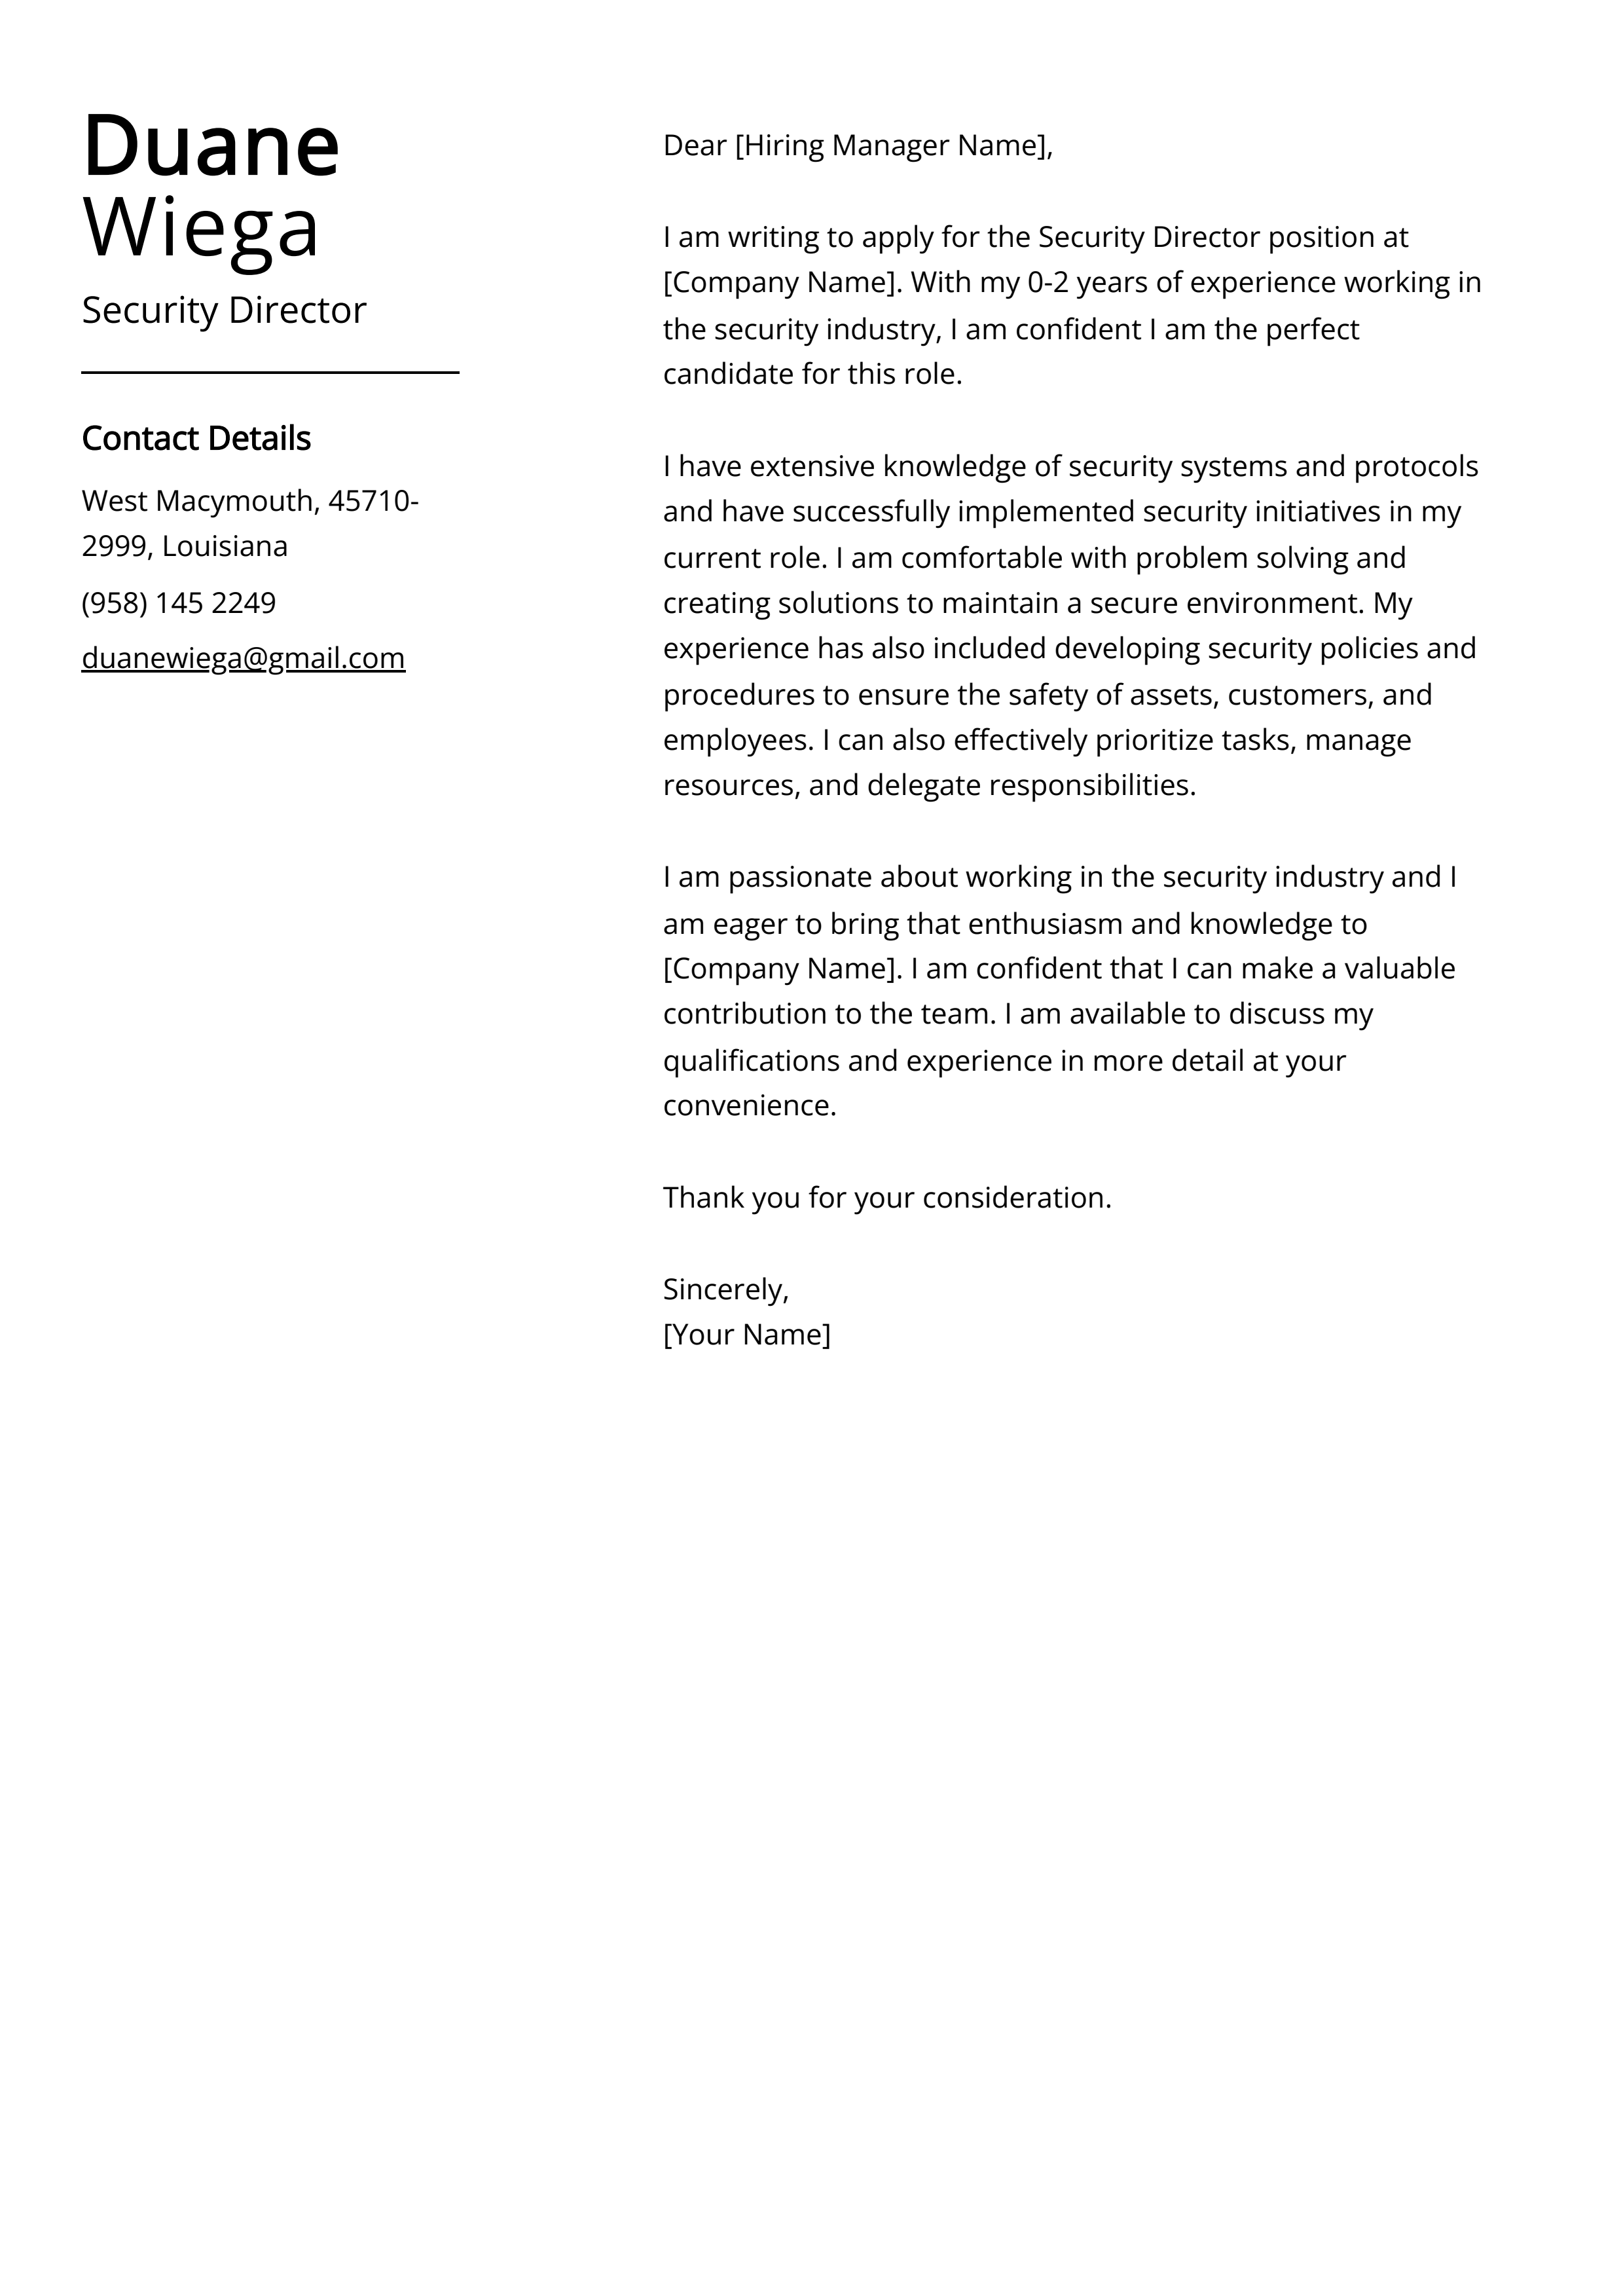 Security Director Cover Letter Example